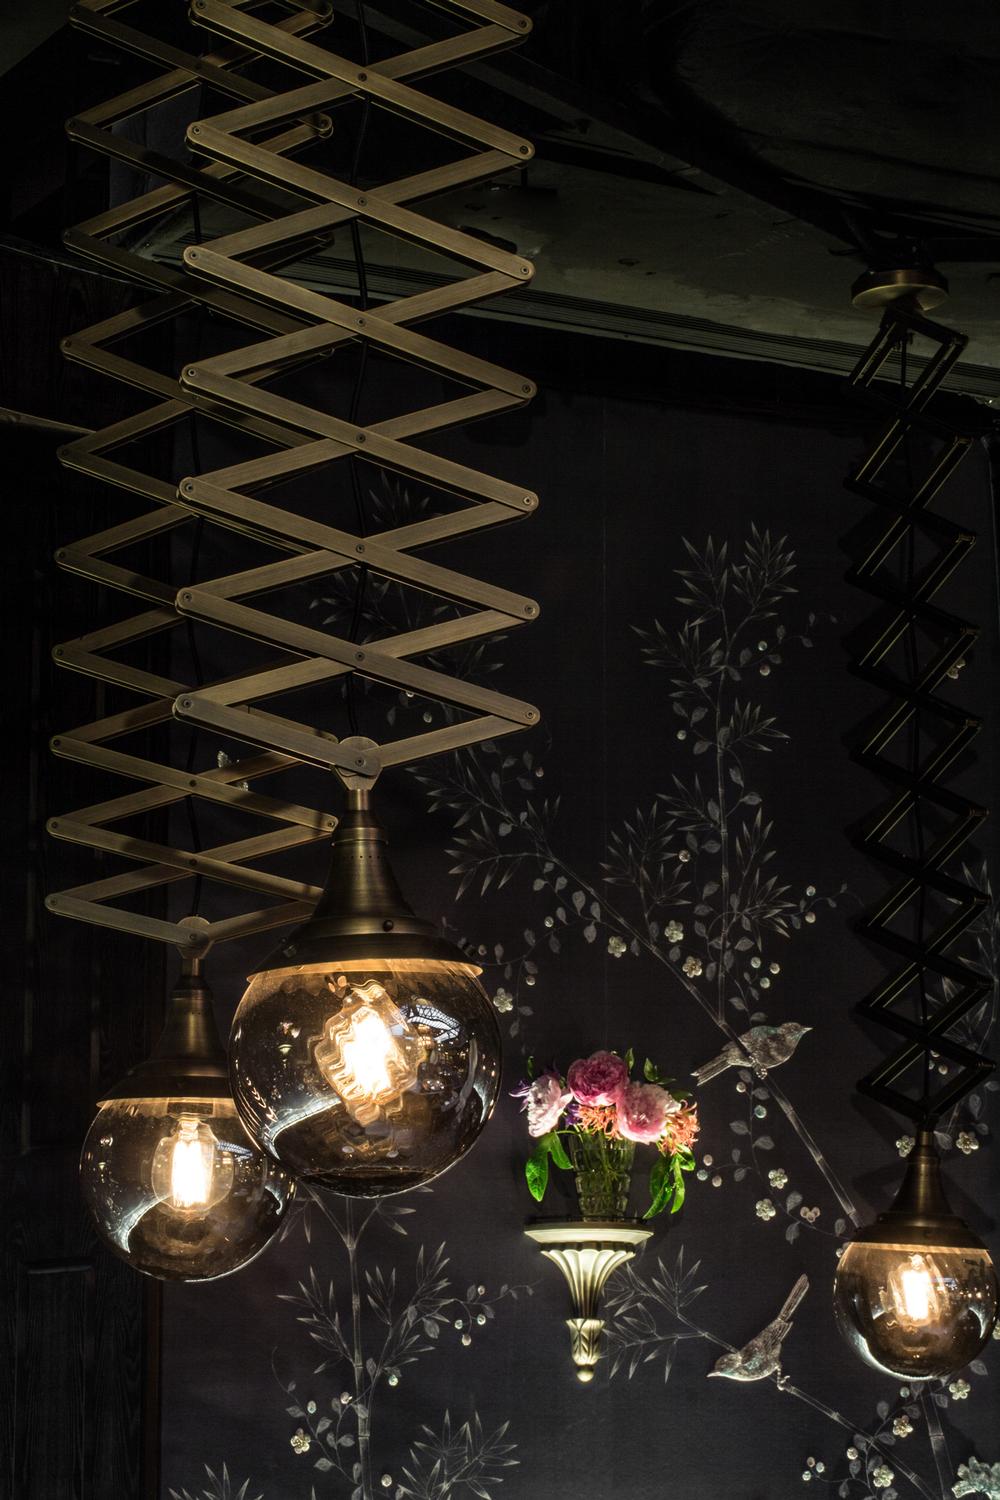 The lighting in Mott 32 has different mood settings for the day and night